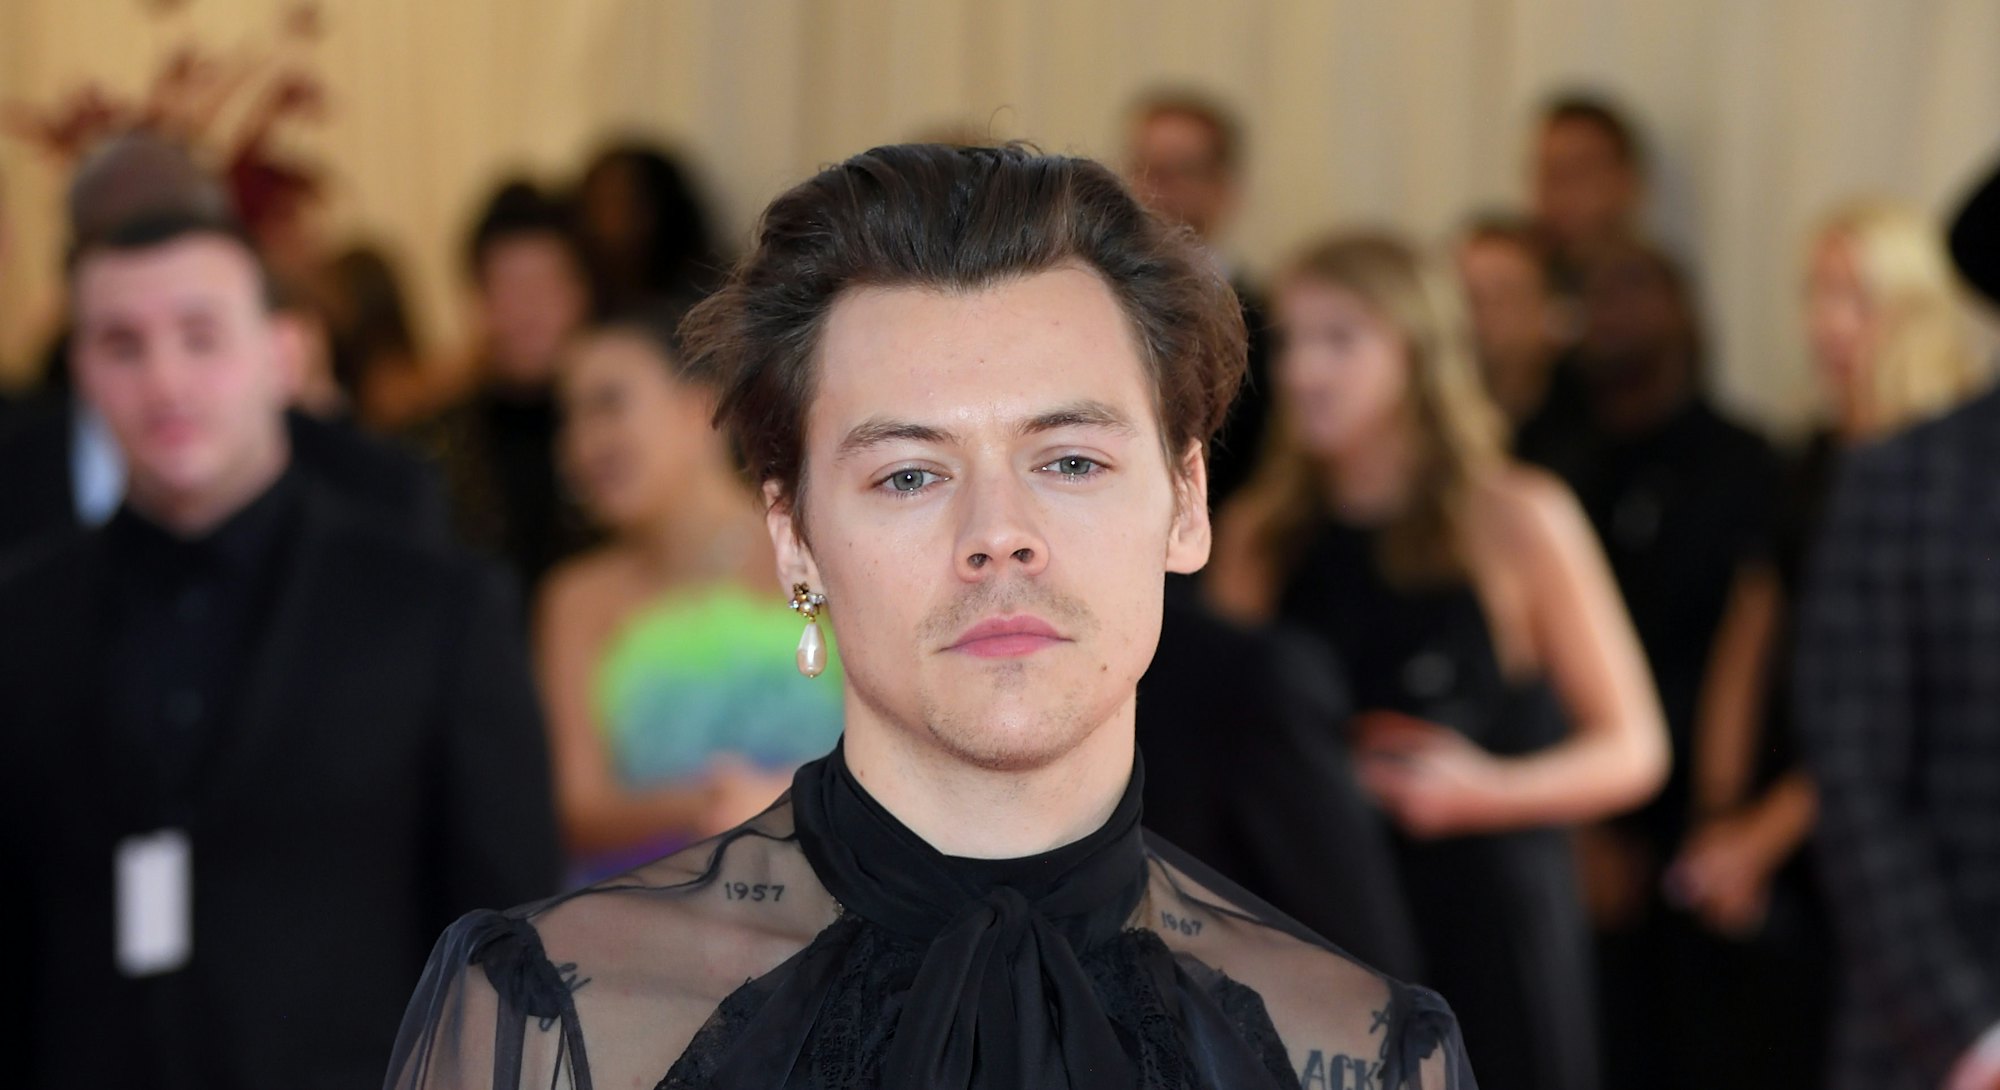 Harry Styles is known for rocking nail art. His multicolored manicure at the Met Gala was one of the...